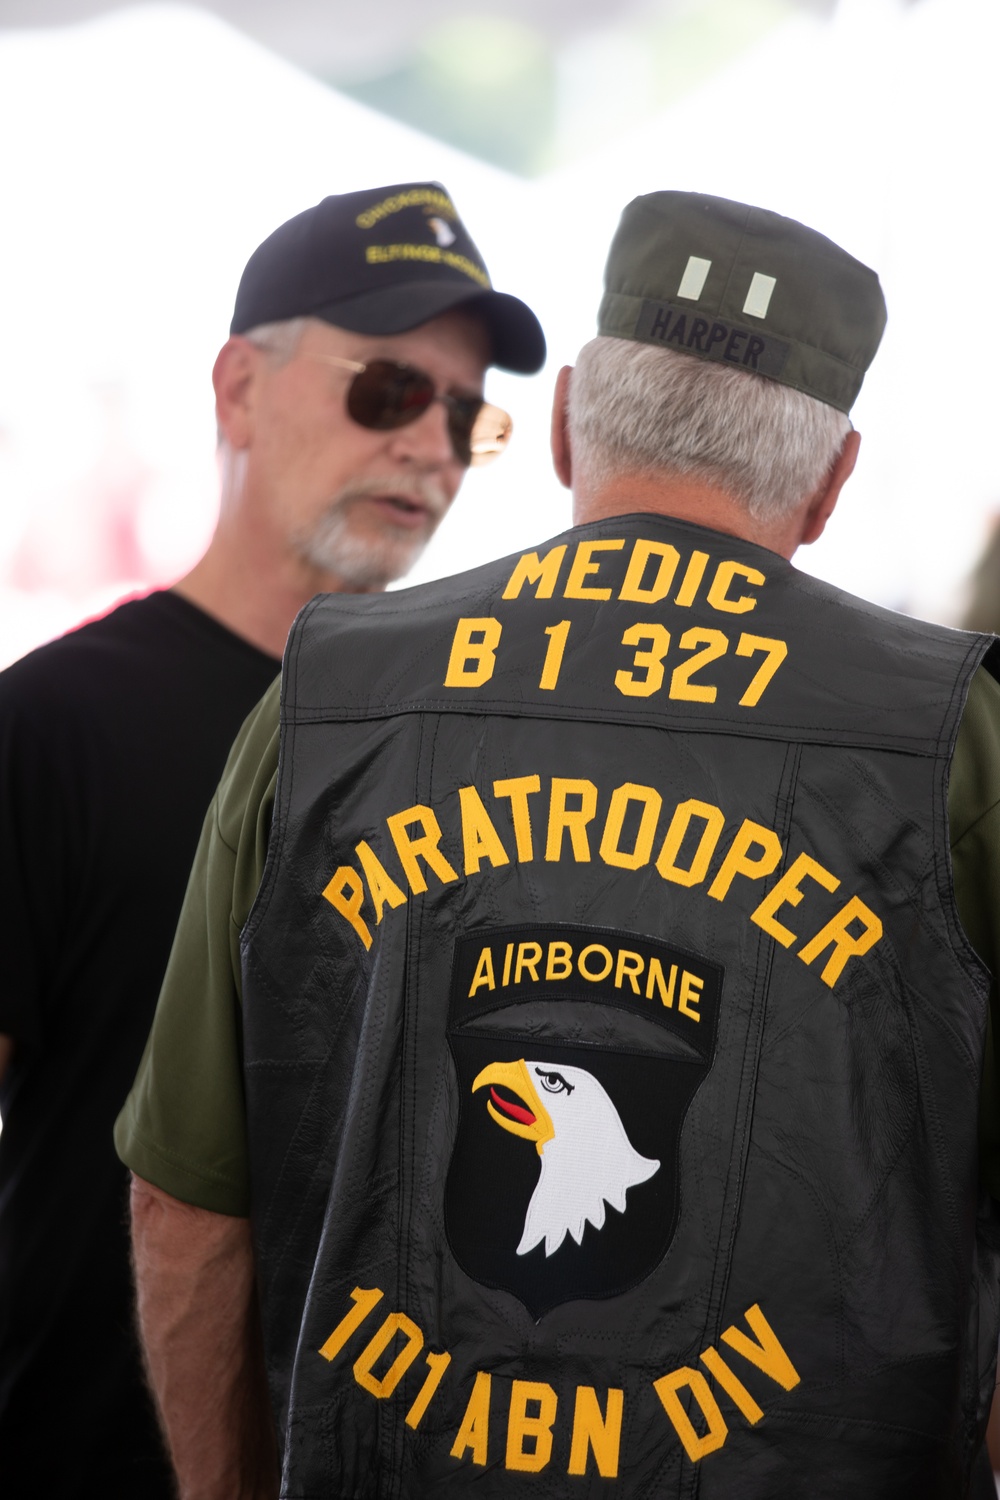 Vietnam Veterans Gather for the 101st Airborne Division (Air Assault) Honorary Air Assault Badge Ceremony